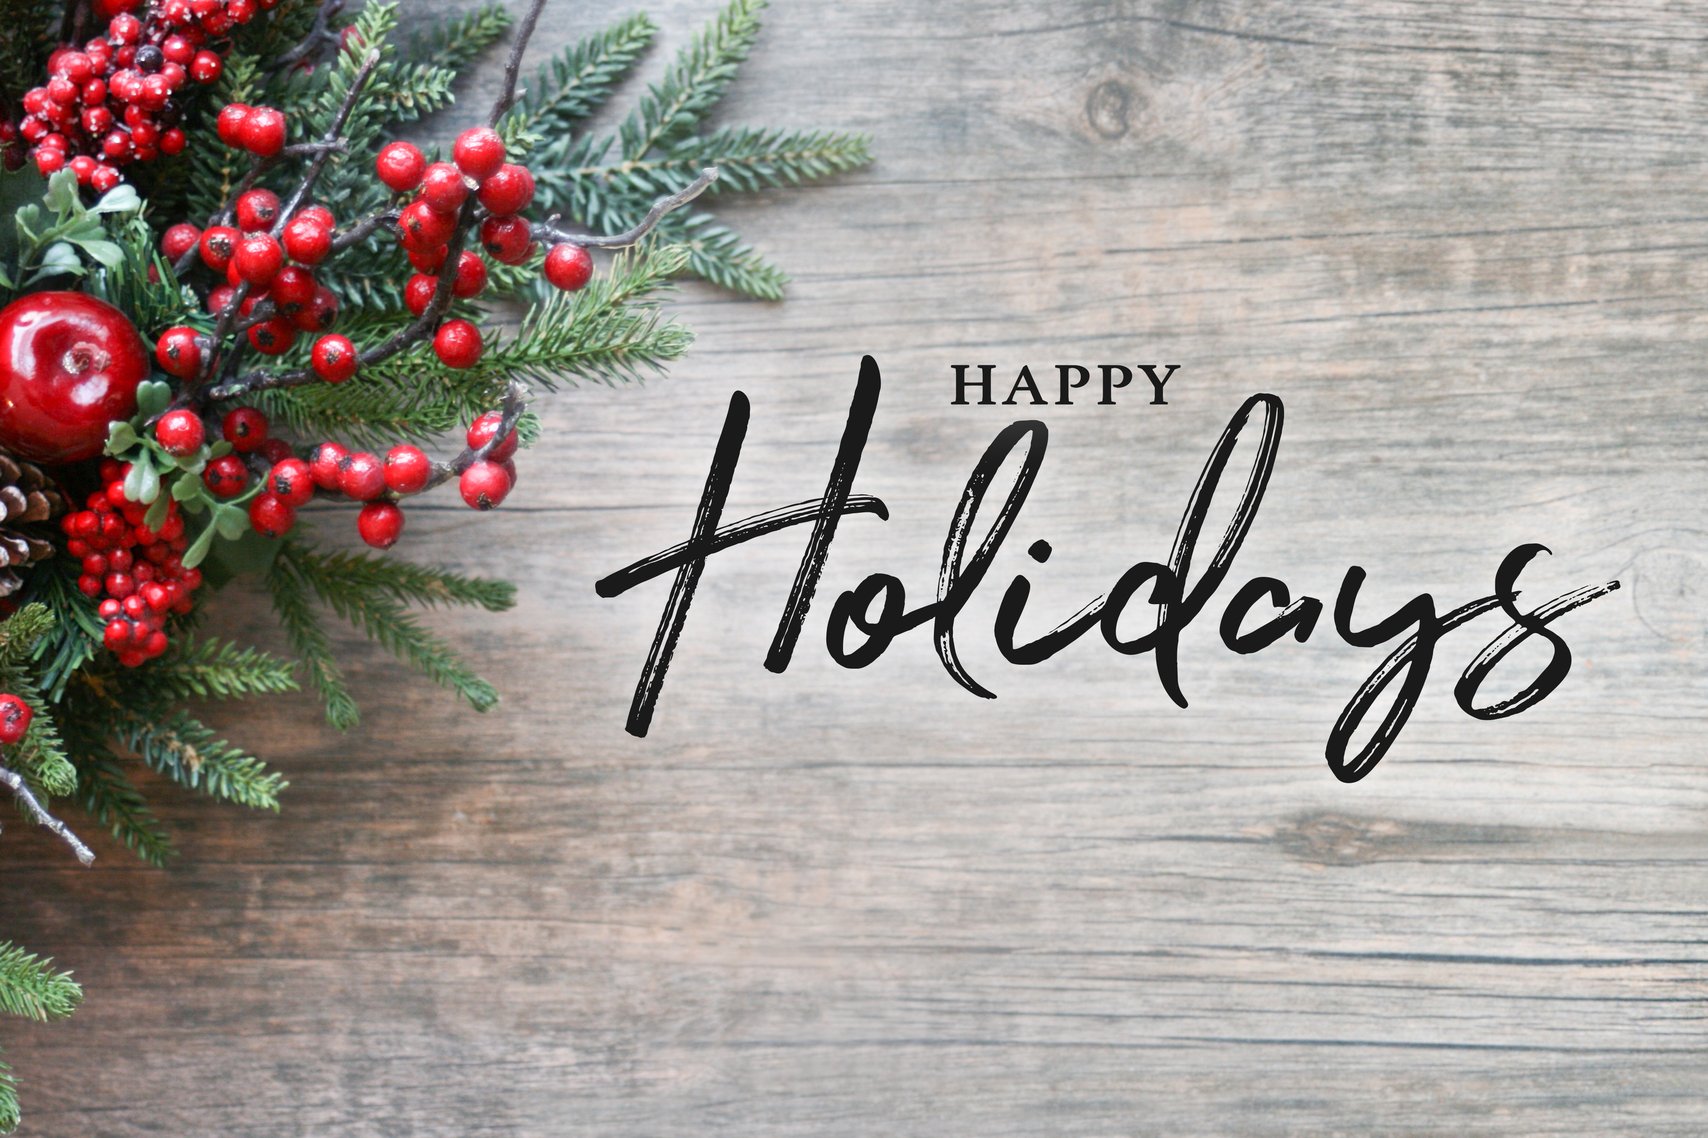 Happy Holidays from SiteSeer